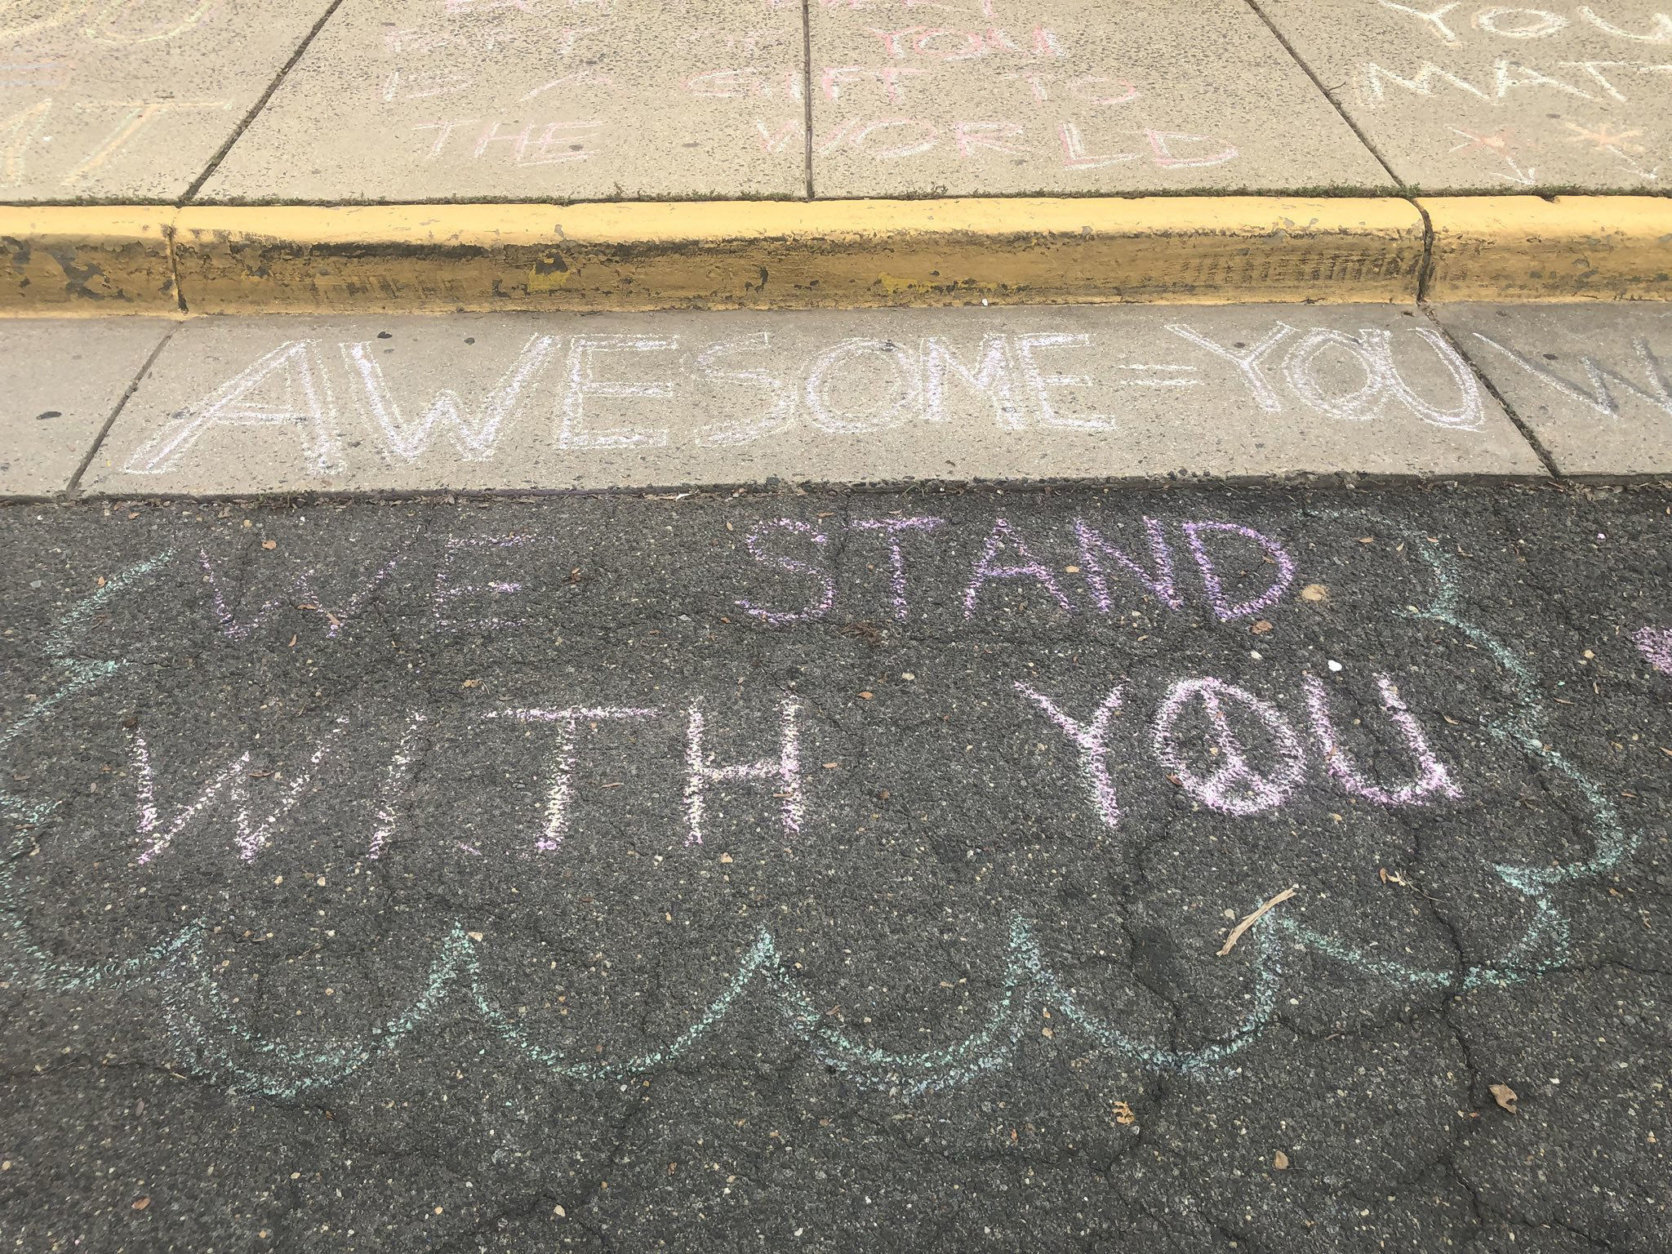 Messages of support were left on the sidewalk in front of the Jewish Community Center of Northern Virginia, in Annandale, two days after swastikas were spray-painted on the building. (WTOP/Melissa Howell)